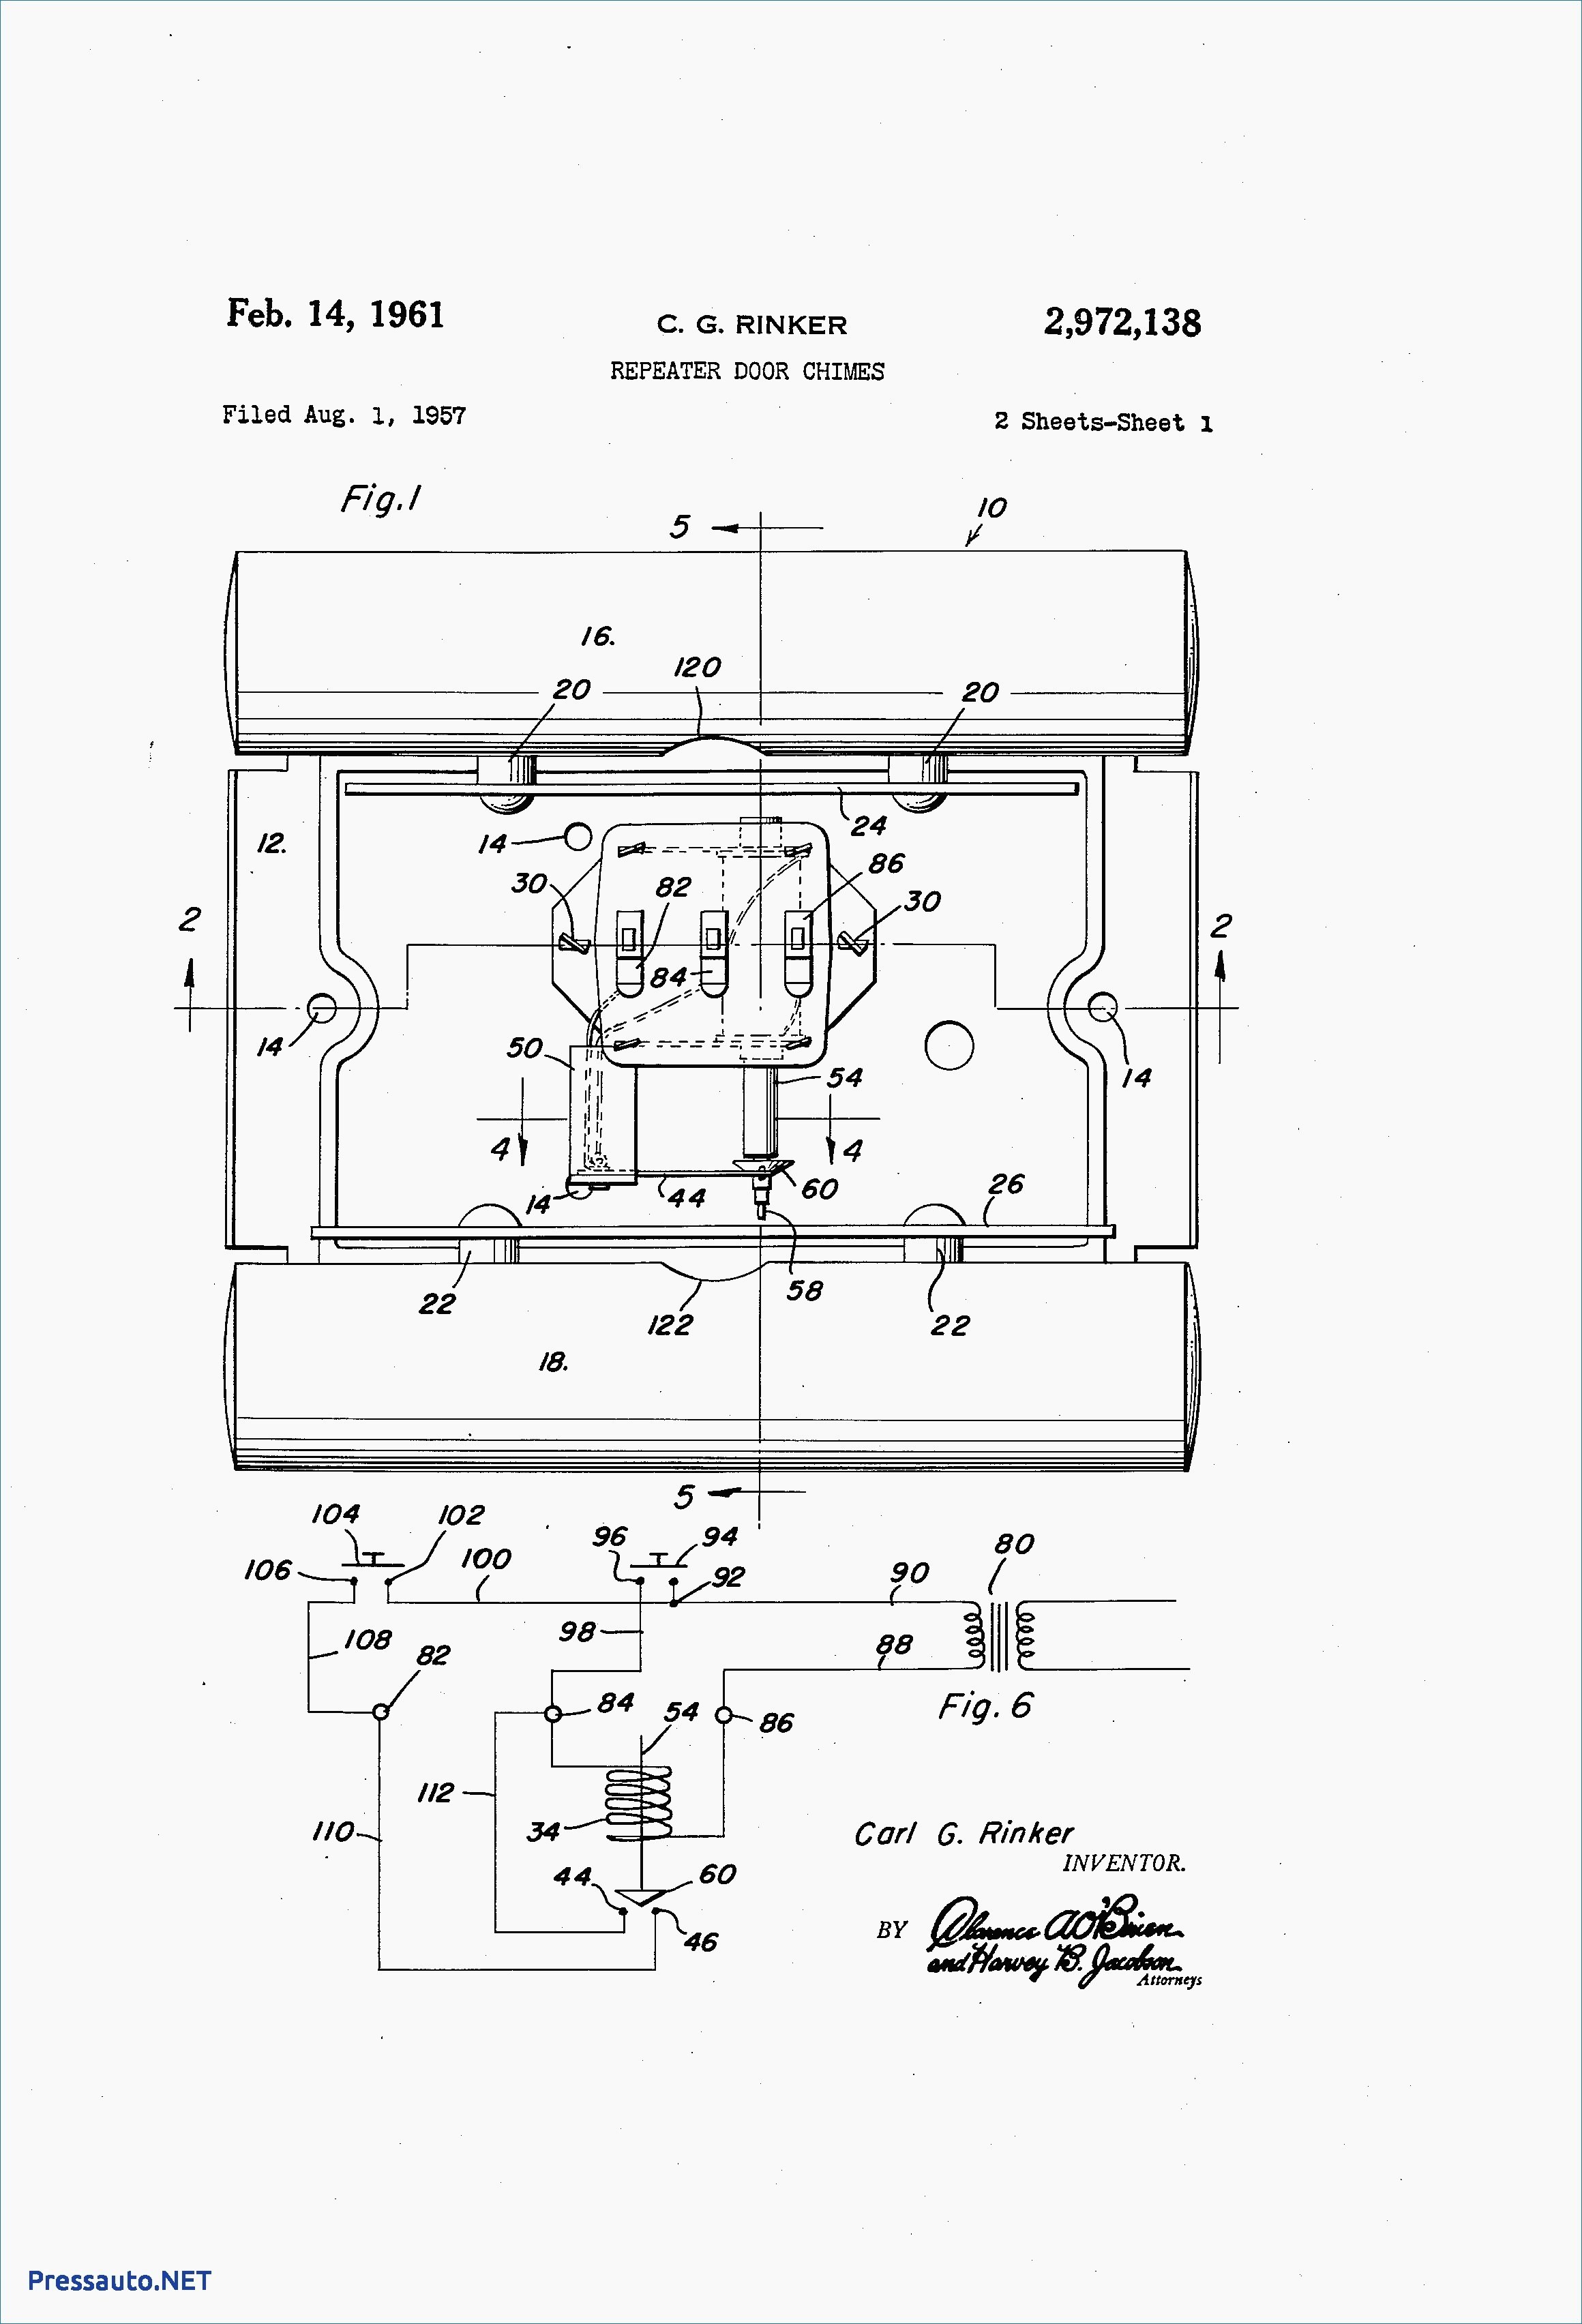 Nice Friedland Door Chimes Wiring Diagram s Electrical and